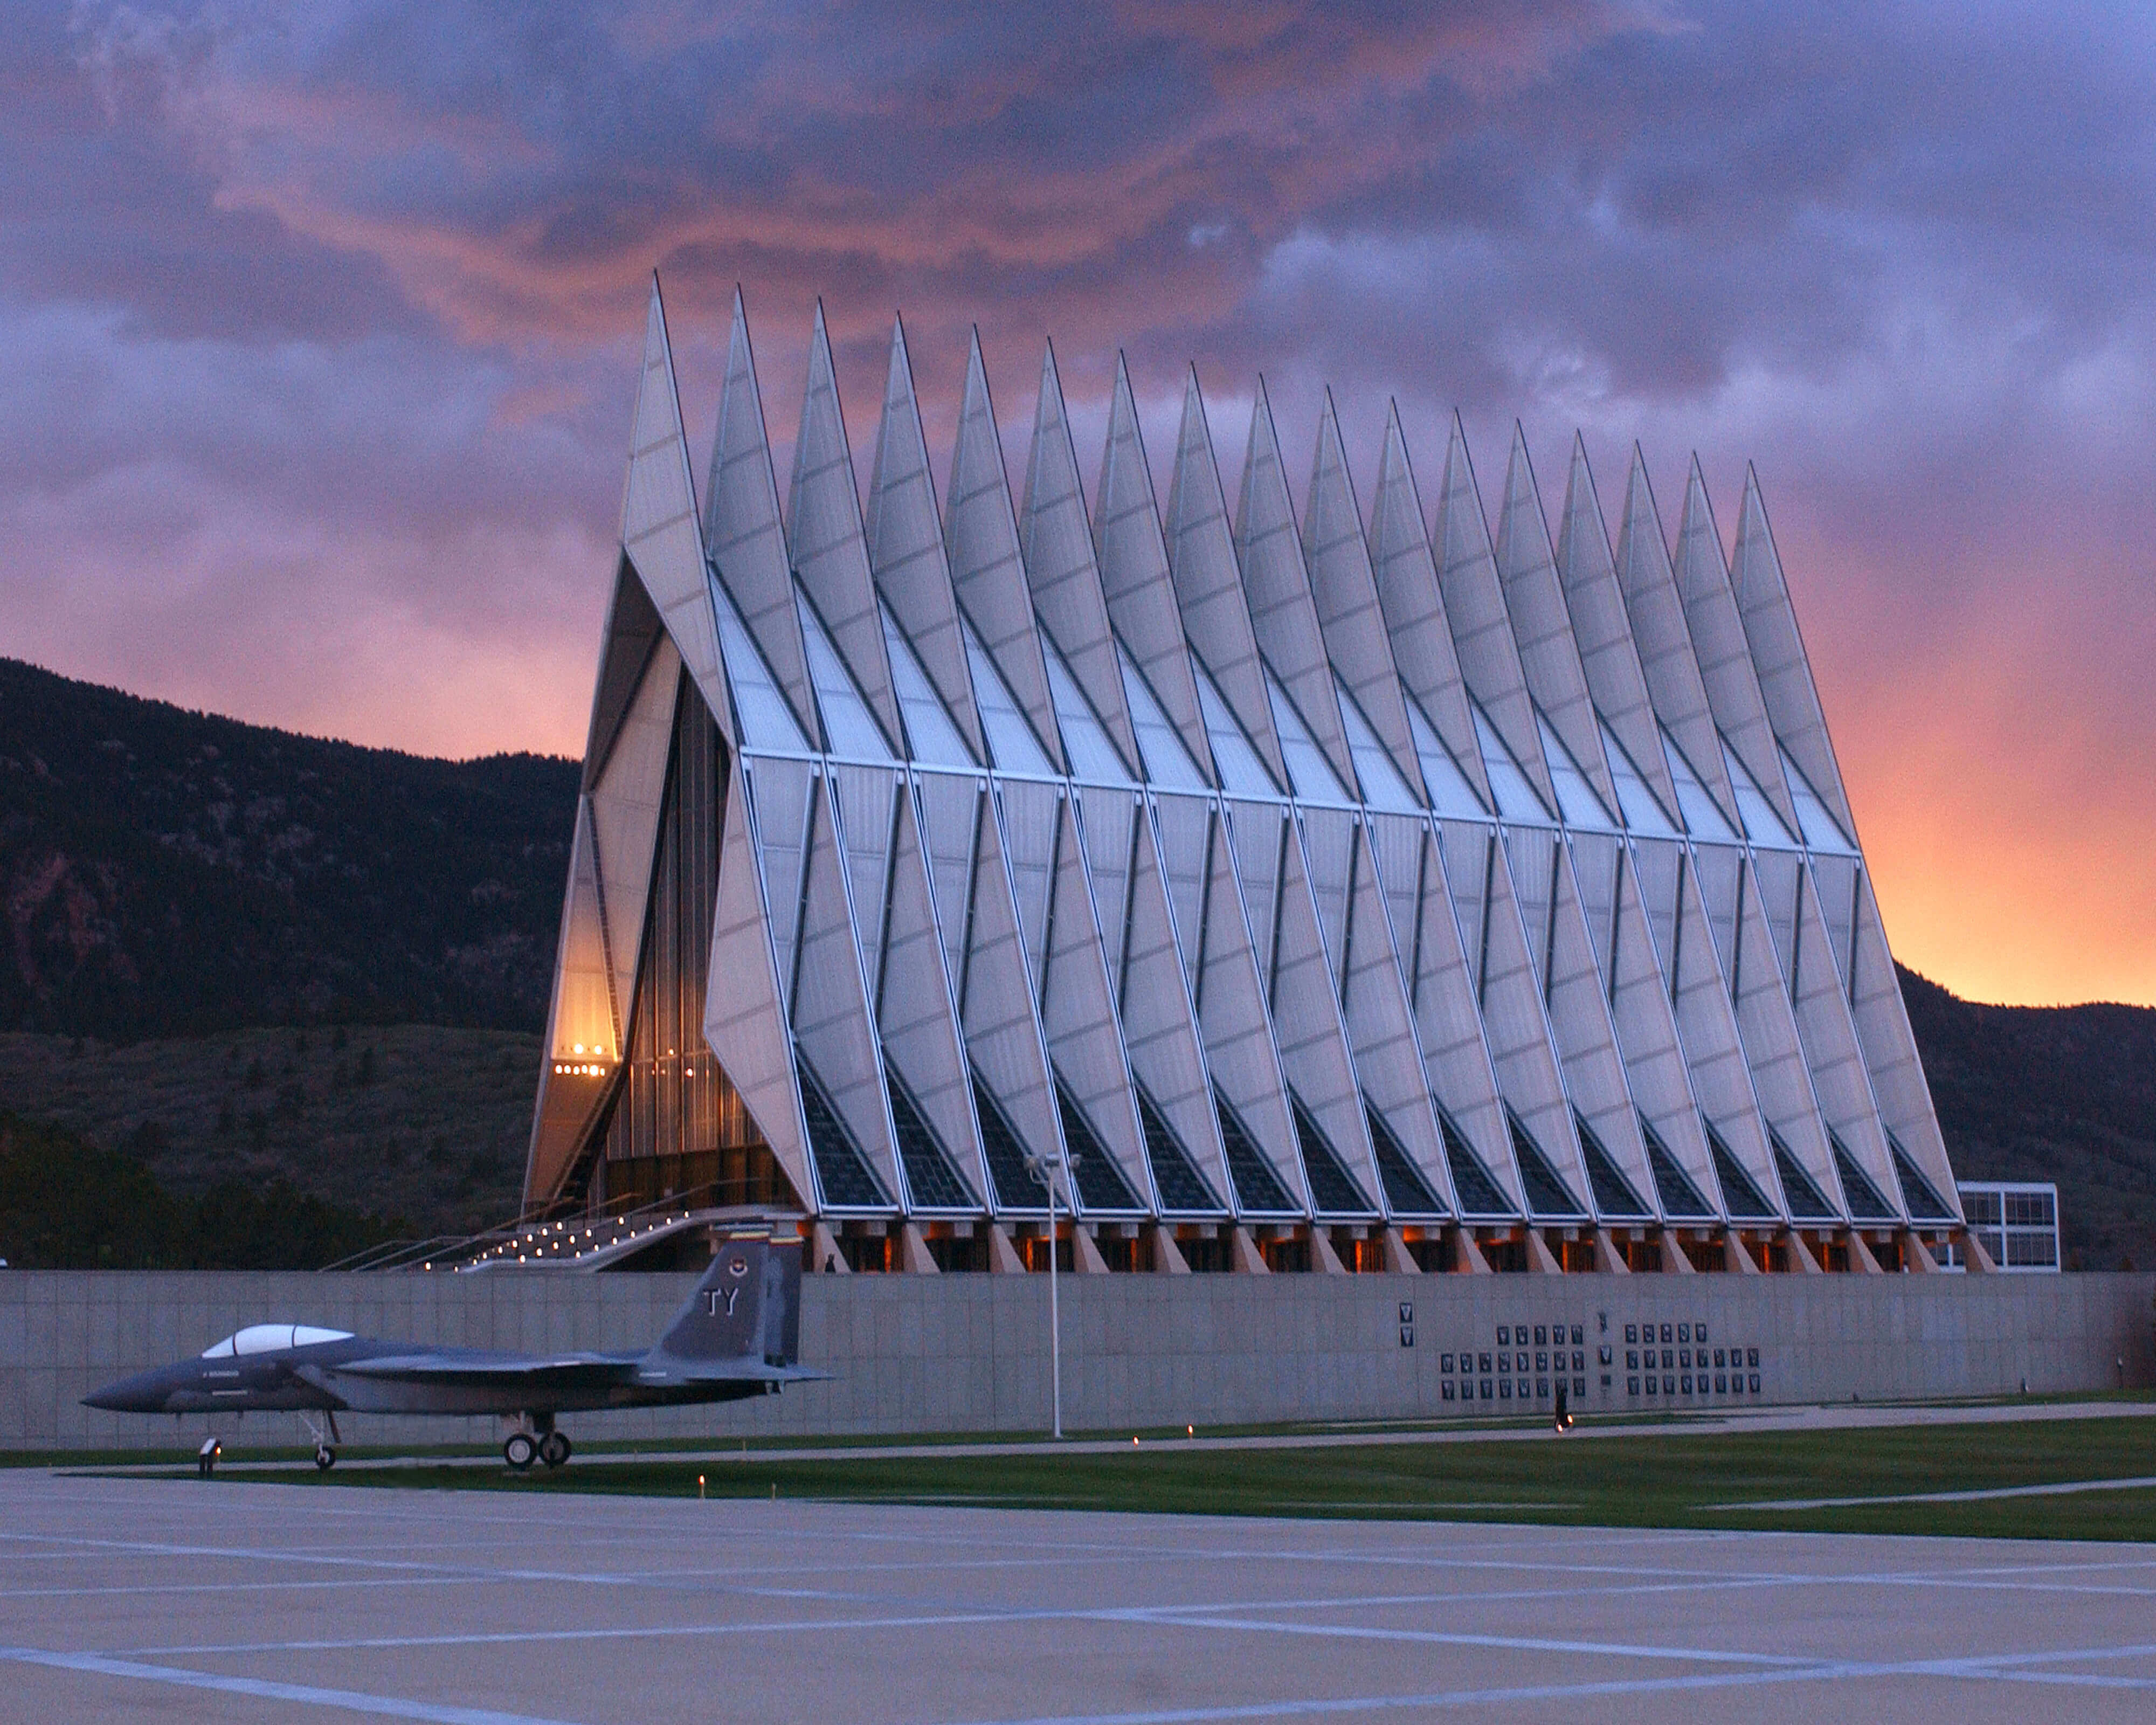 Image of the United States Air Force Academy cadet chapel